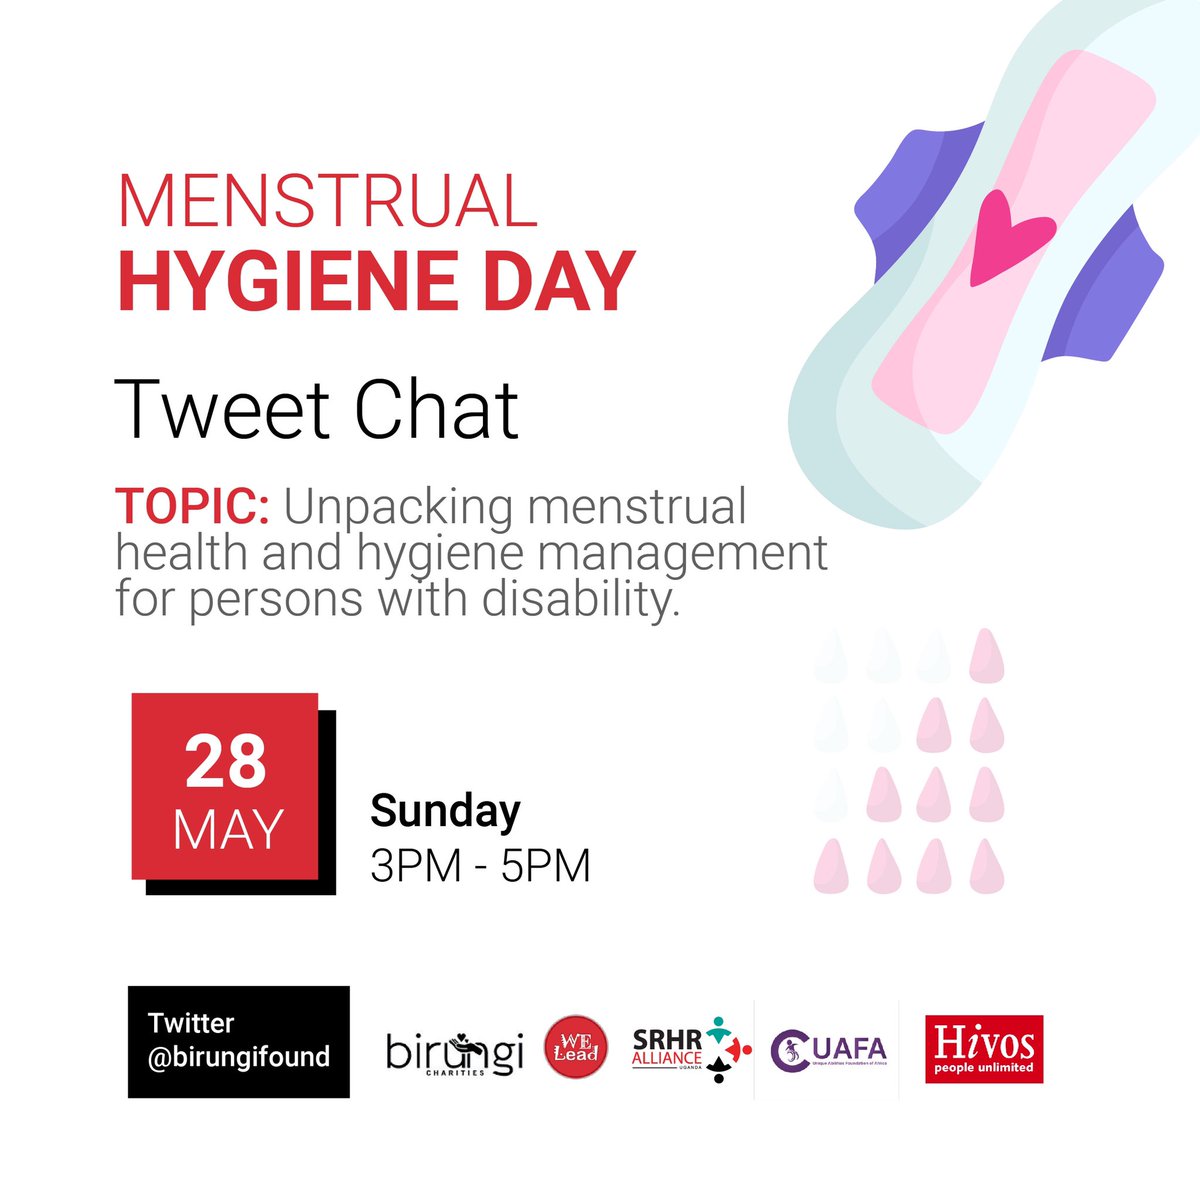 Women and girls with disabilities may experience menarche and menstruation differently and more negatively—compared to non-disabled women. 

This #MHDay2023, join @BirungiFound and her partners in a fascinating tweet chat. 
#HealthyPeriods4Her
#WeAreCommitted 
#WeLeadOurSRHR